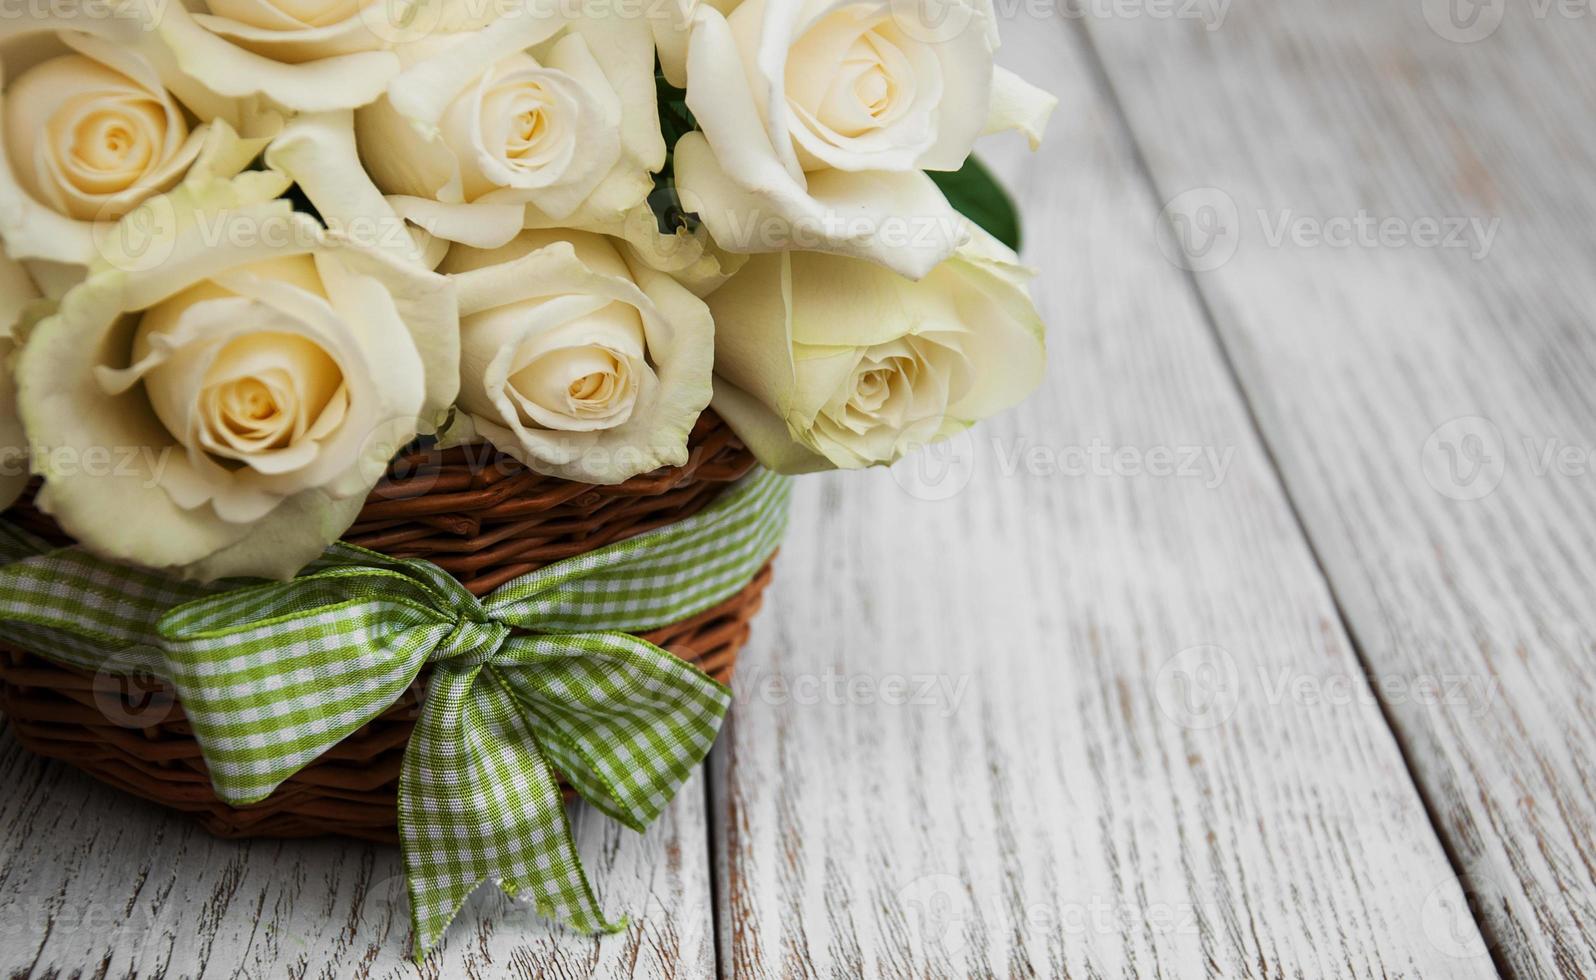 White roses in a basket photo